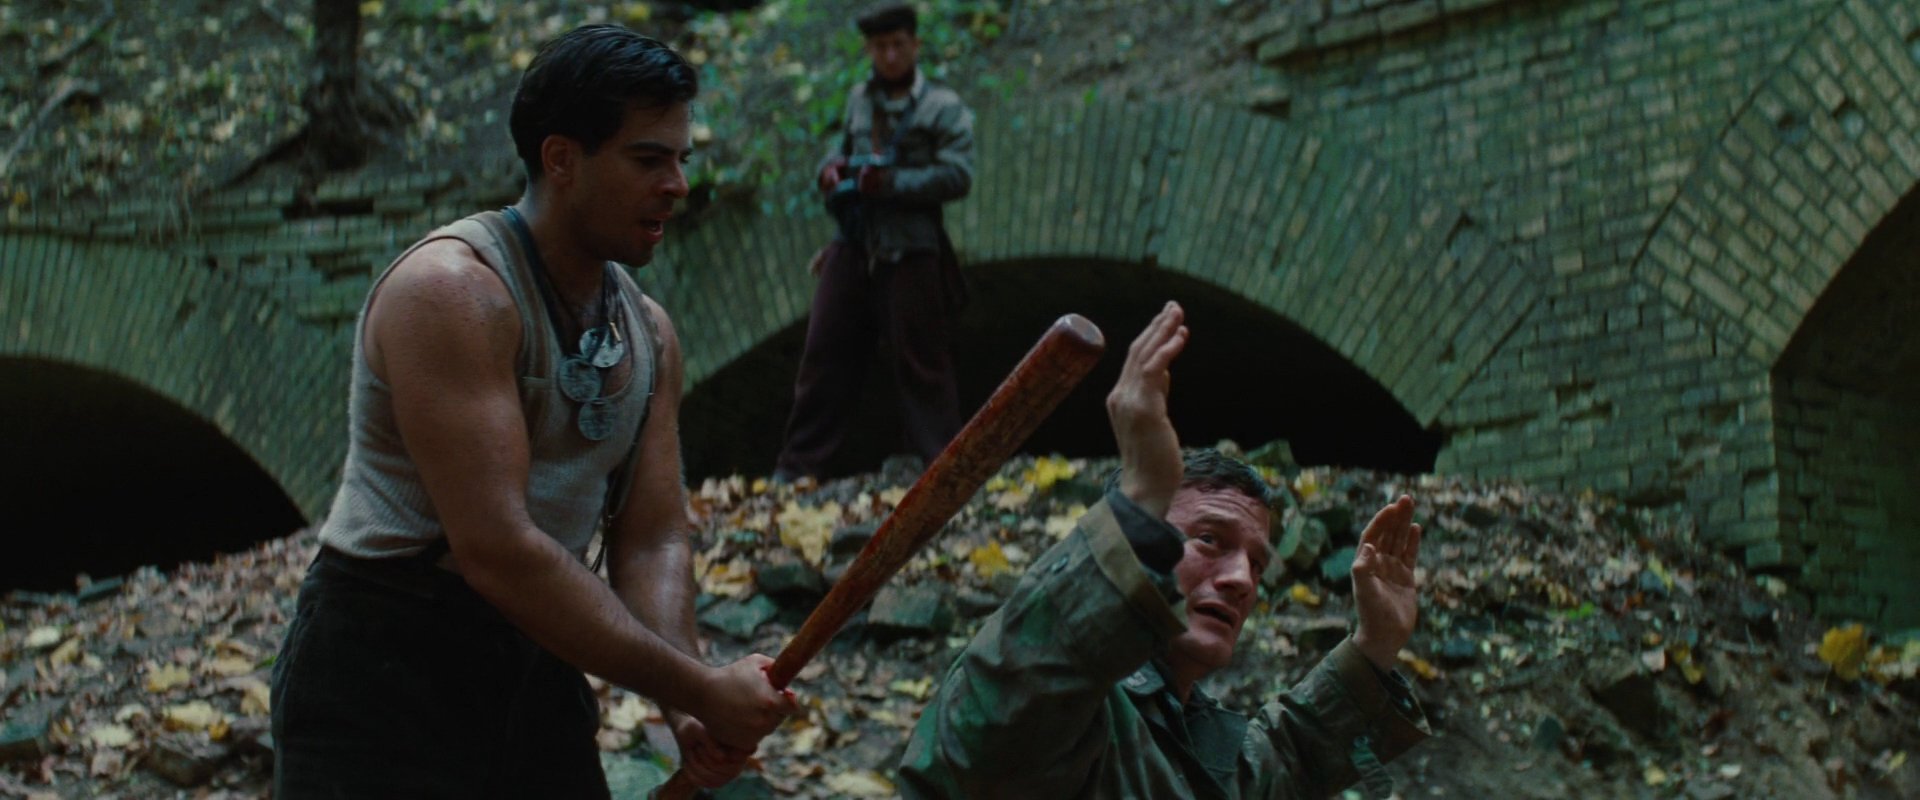 13. In Inglourious Basterds, one of the Jewish names carved on The Bear Jew...